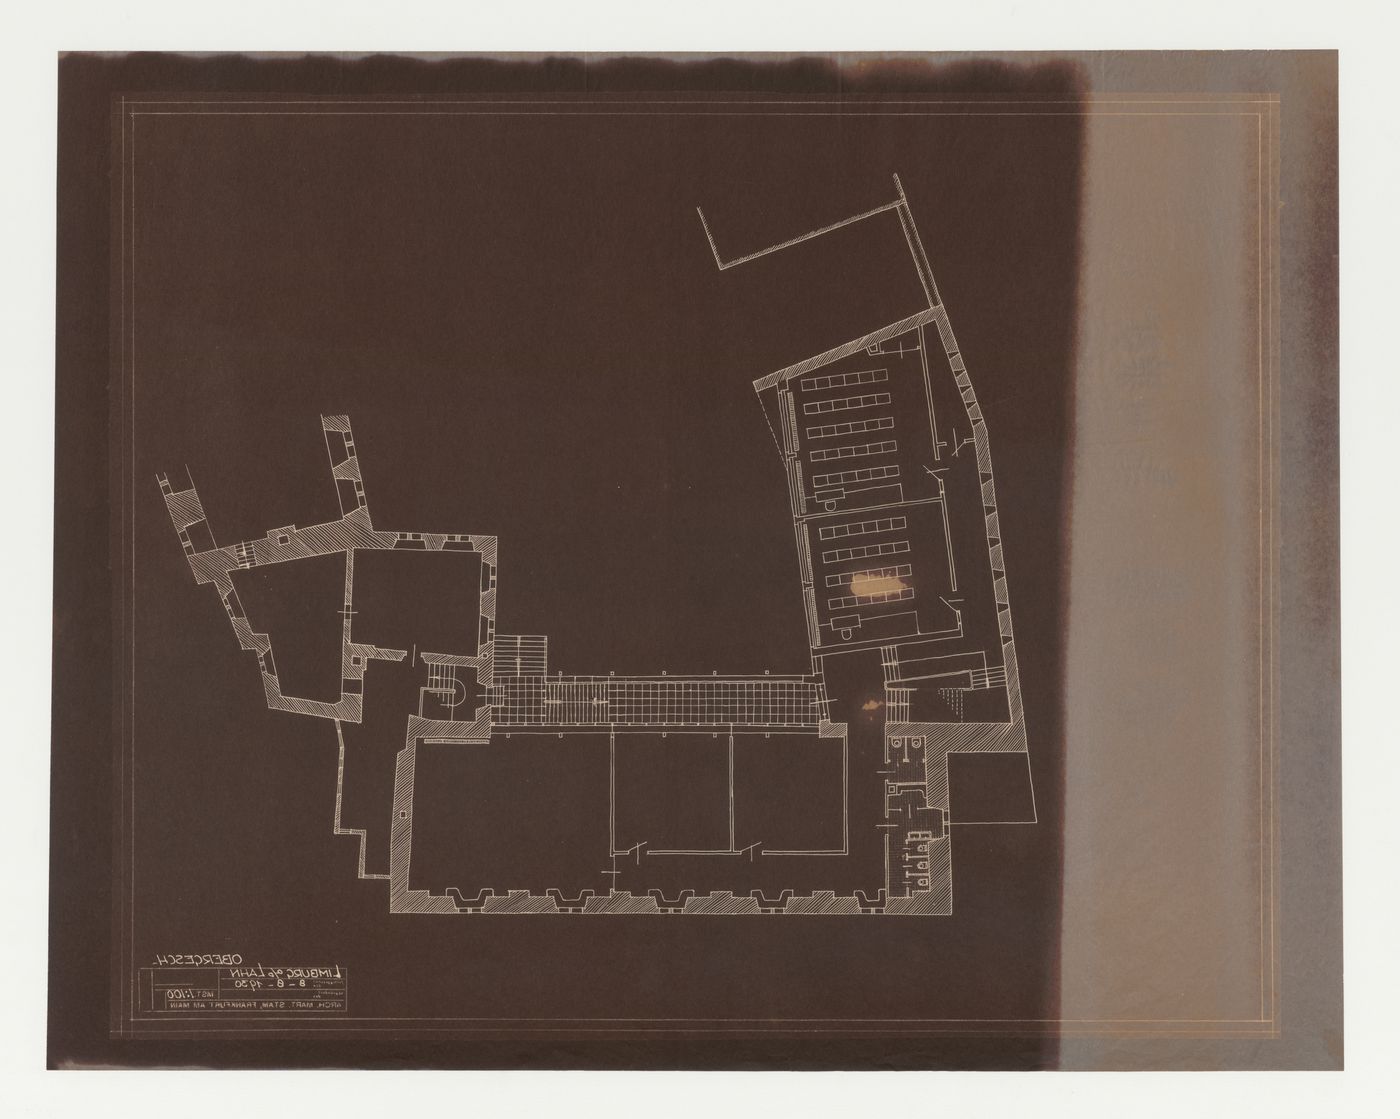 First floor plan for an addition to an existing building, possibly a school, Limburg an der Lahn, Germany